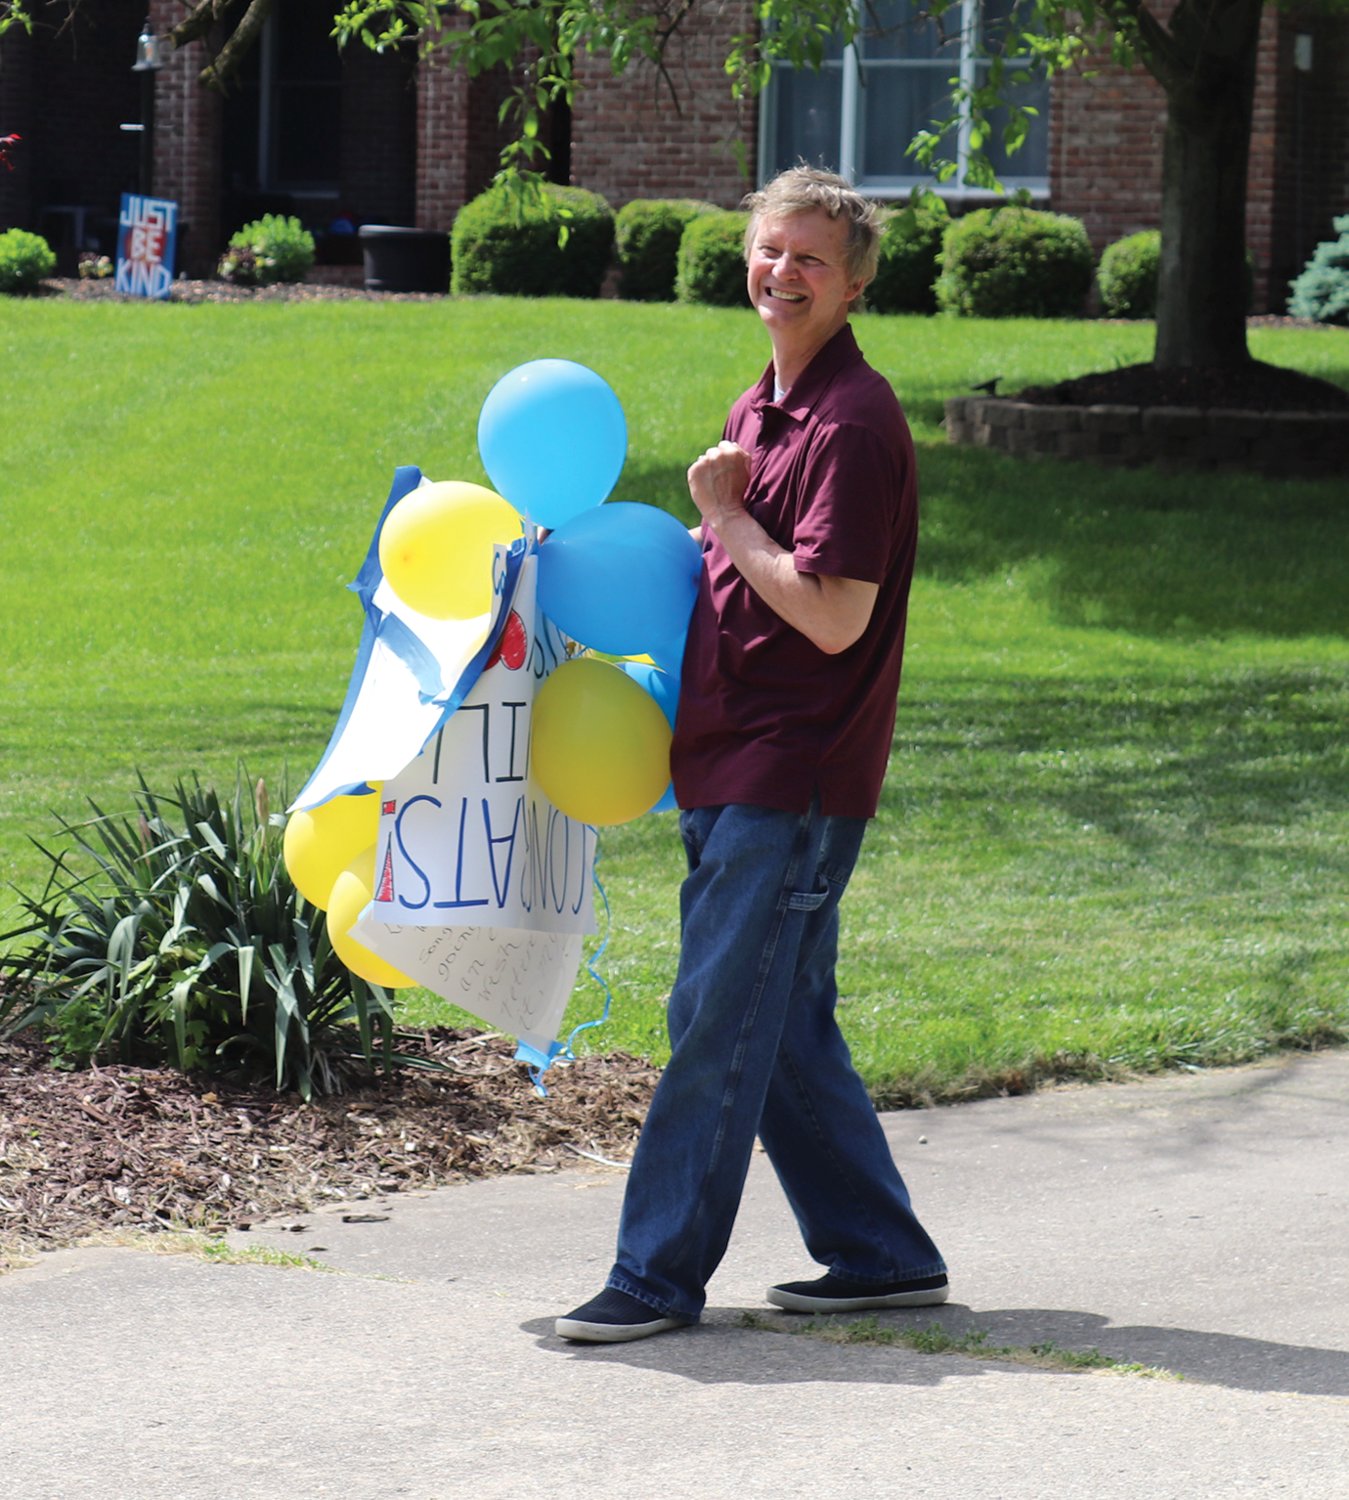 Crawfordsville Schools retiree Larry Hutchison is quickly overcome Wednesday with presents, baloons and feelings of gratitude during an impromptu parade in his honor.